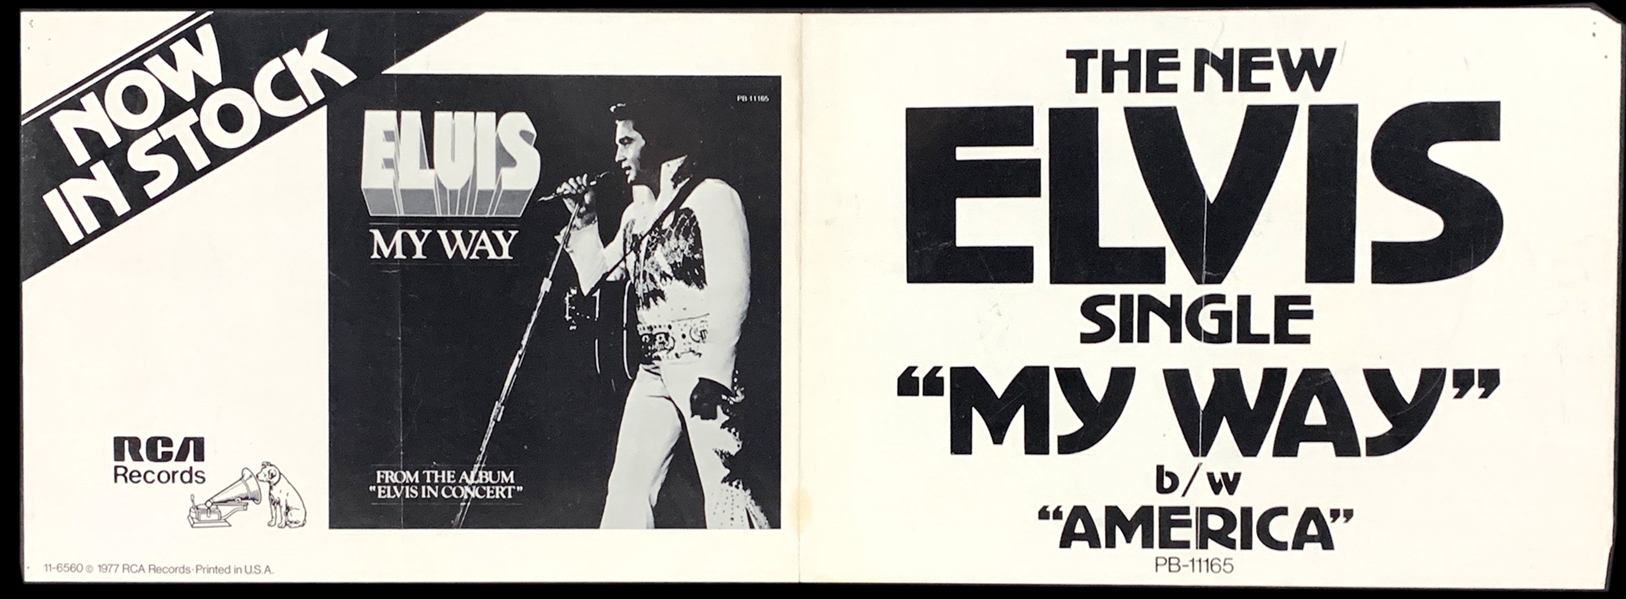 1977 RCA Record Store Poster for Elvis Presleys Single “My Way”